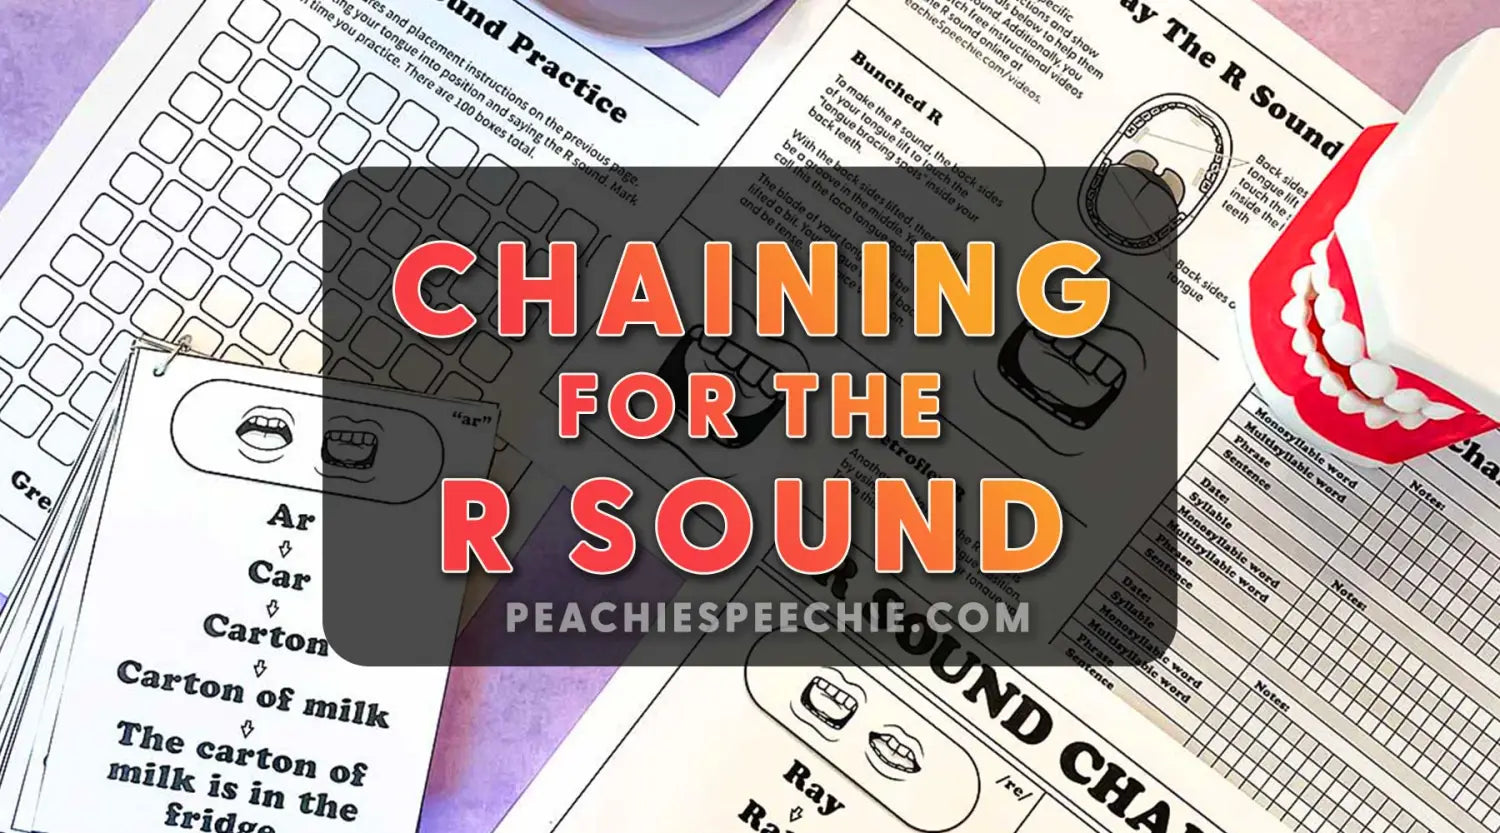 Chaining for the R Sound